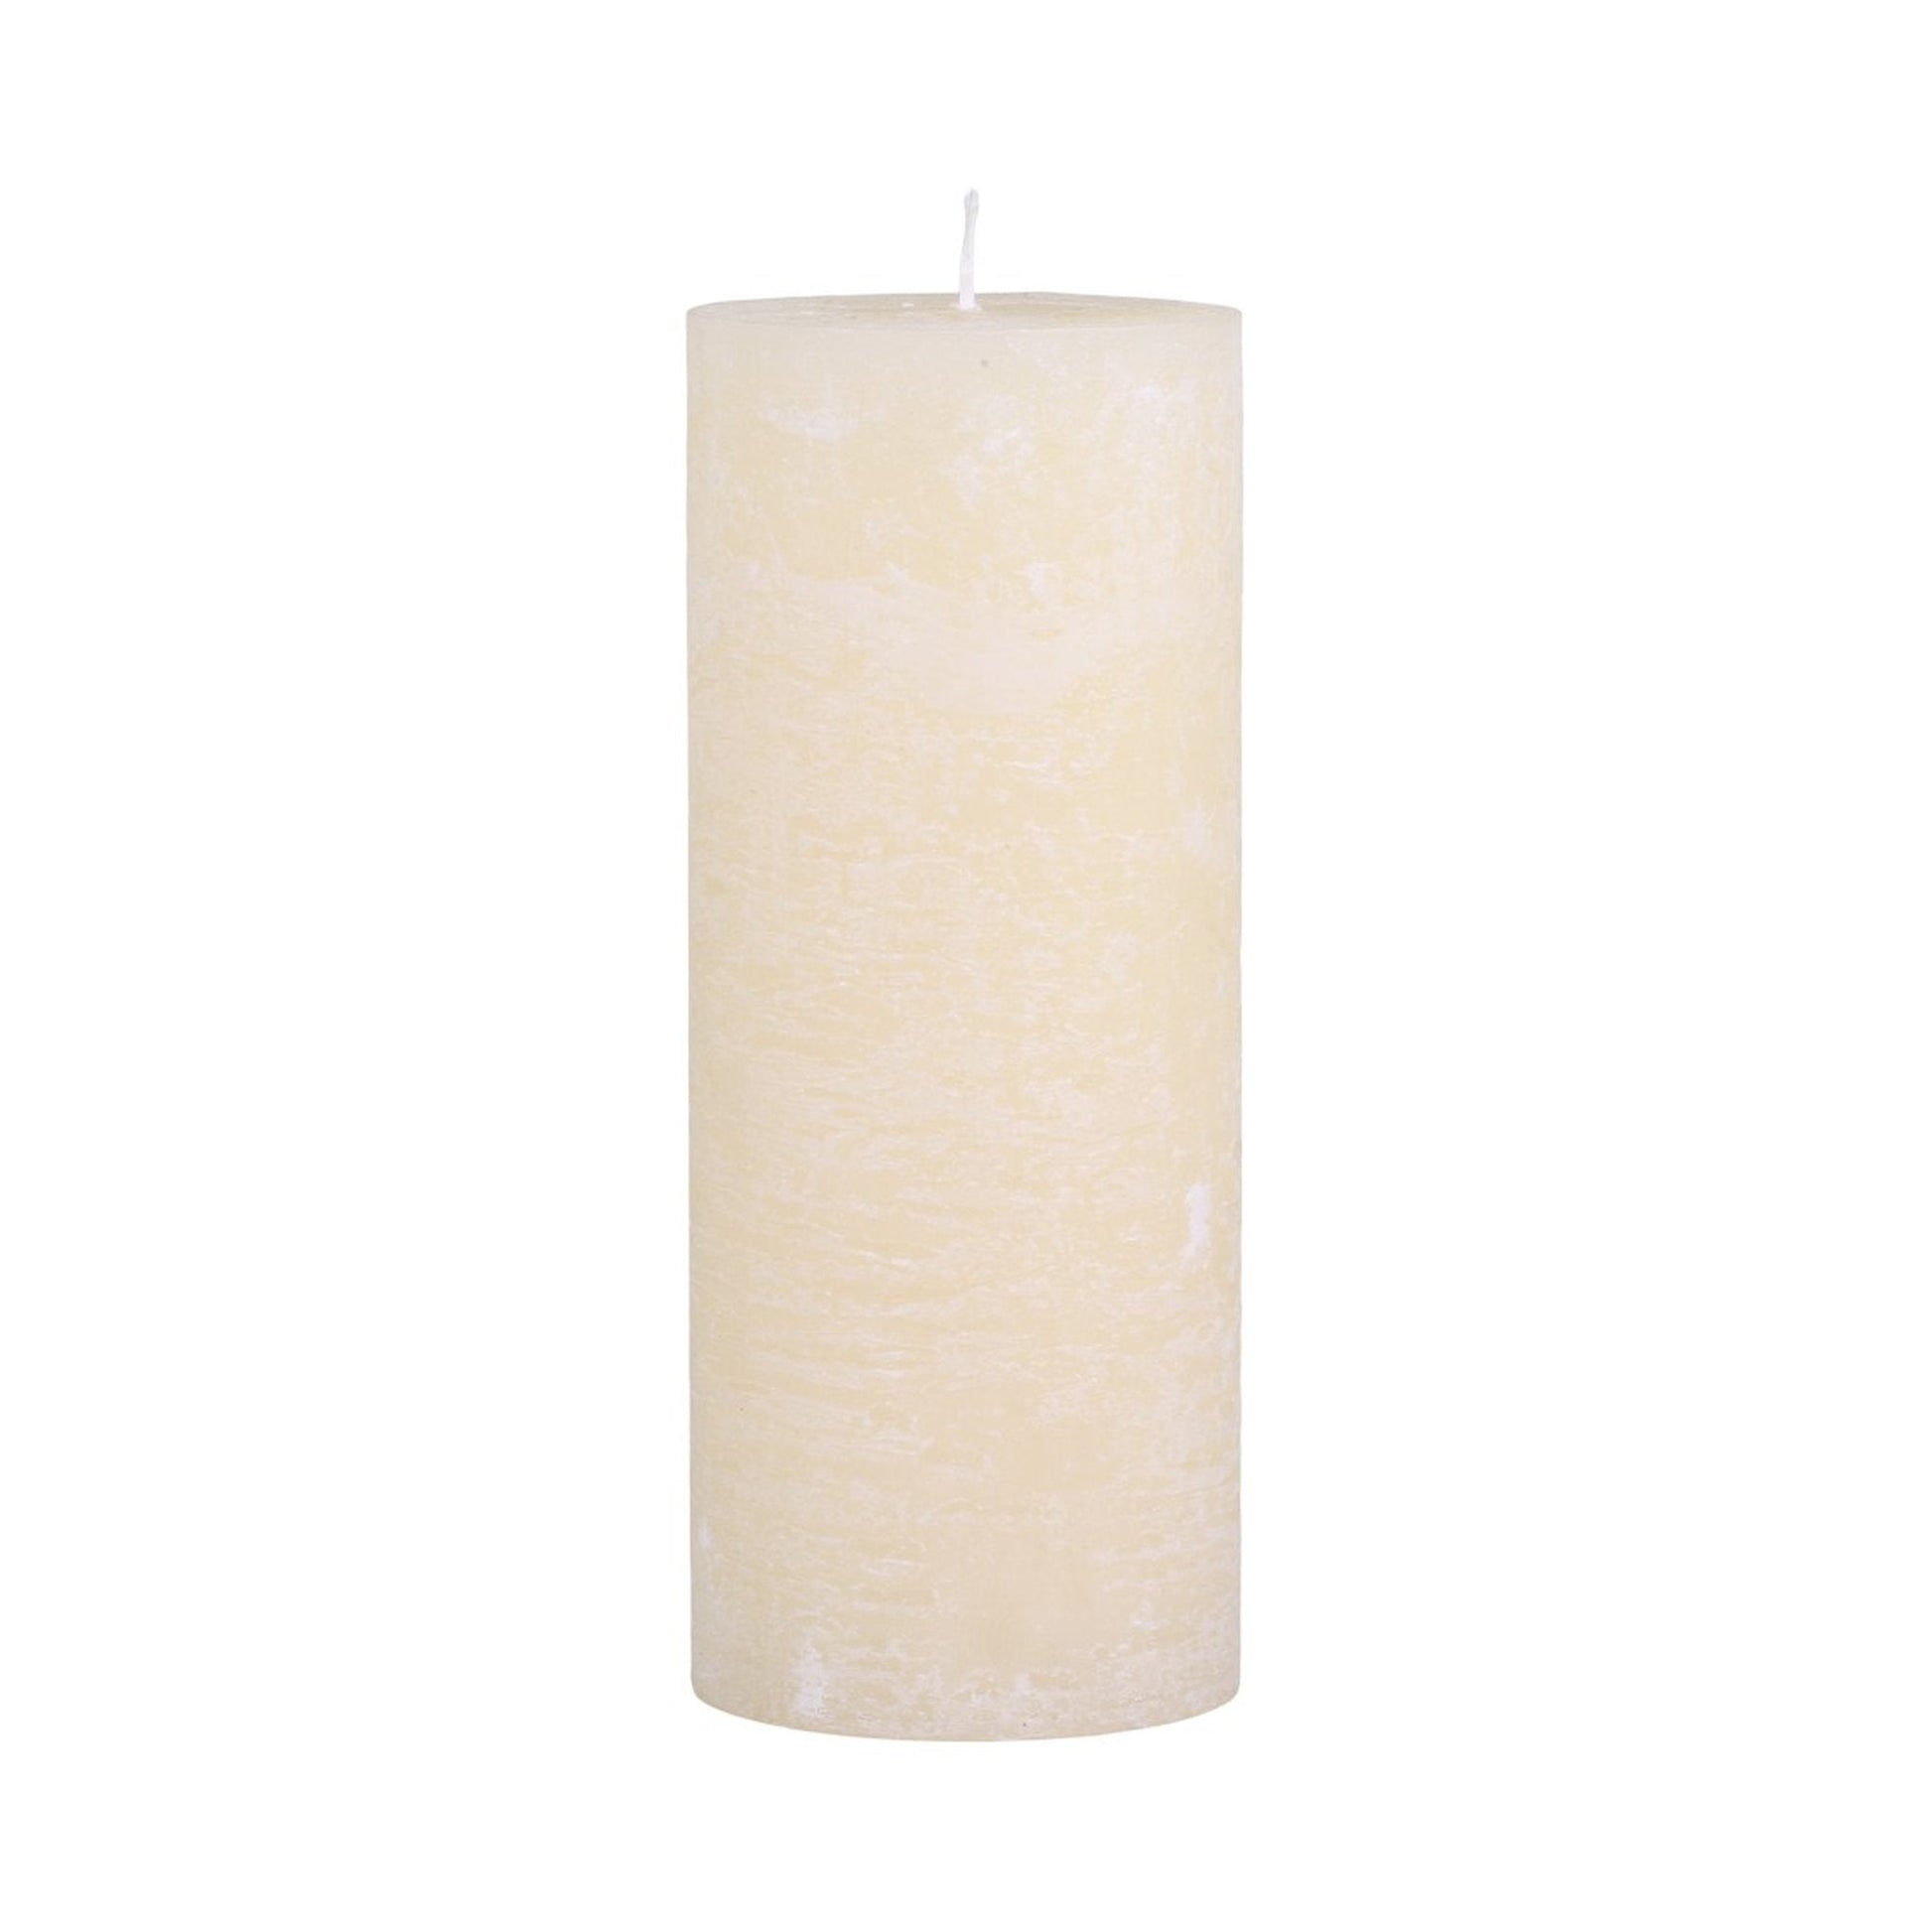 Cream Rustic Pillar Candle 150 hours - Bumble Living